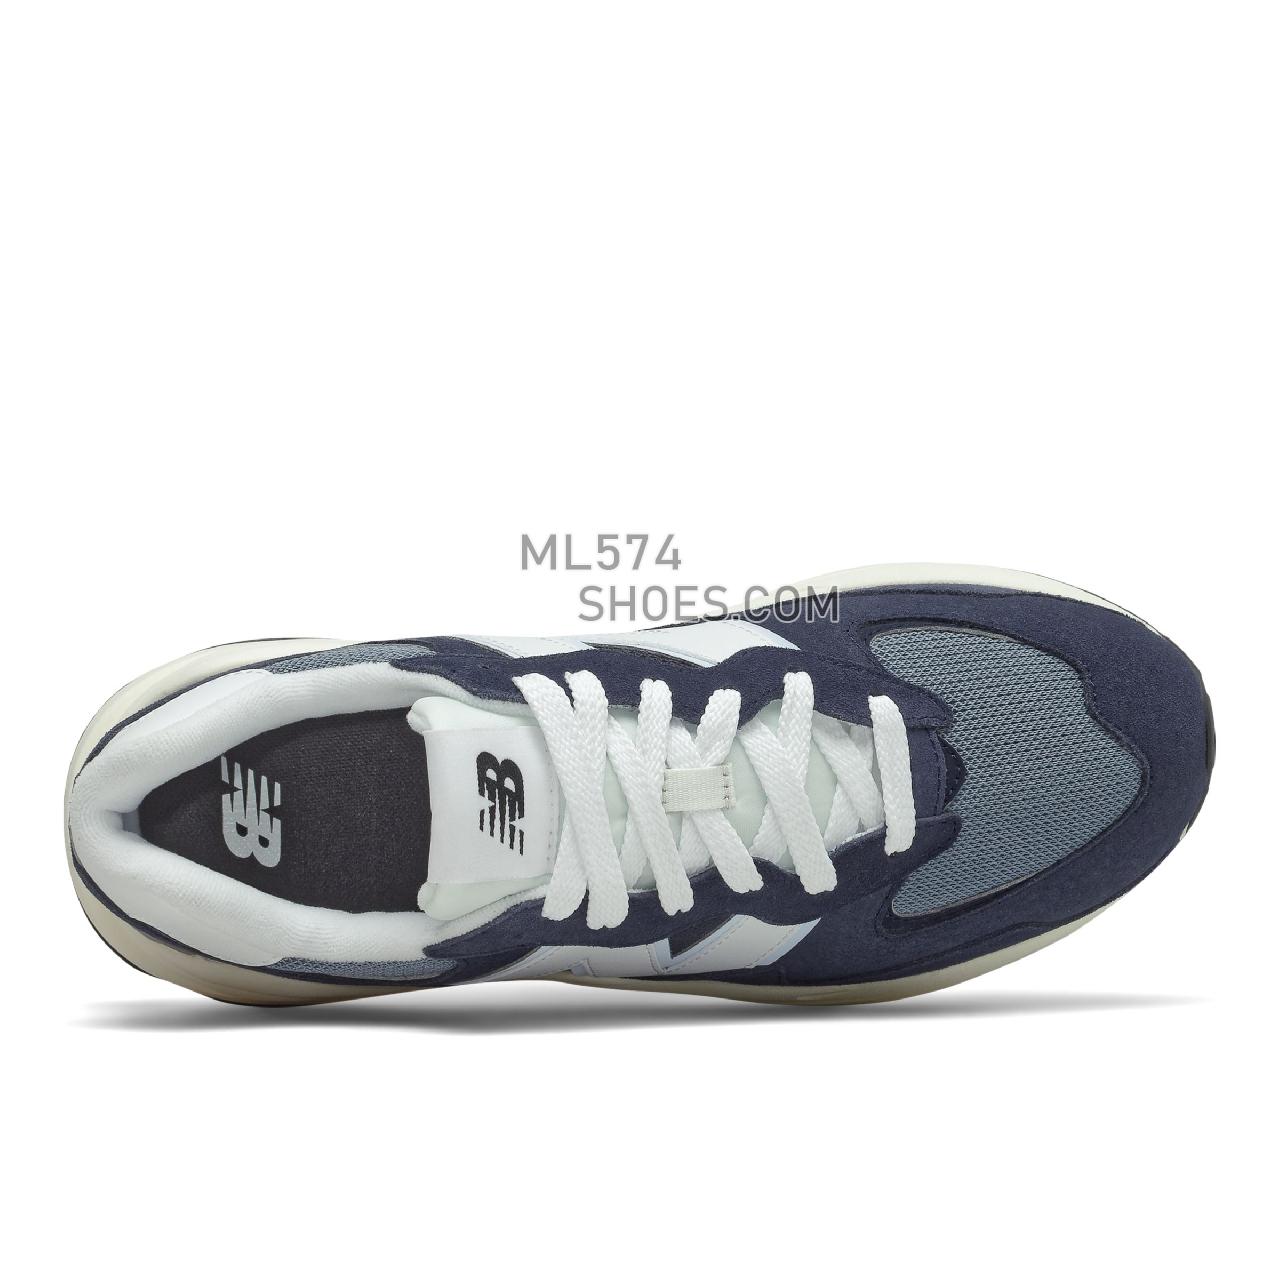 New Balance 57/40 - Men's Sport Style Sneakers - Team Navy with Nb White - M5740CD